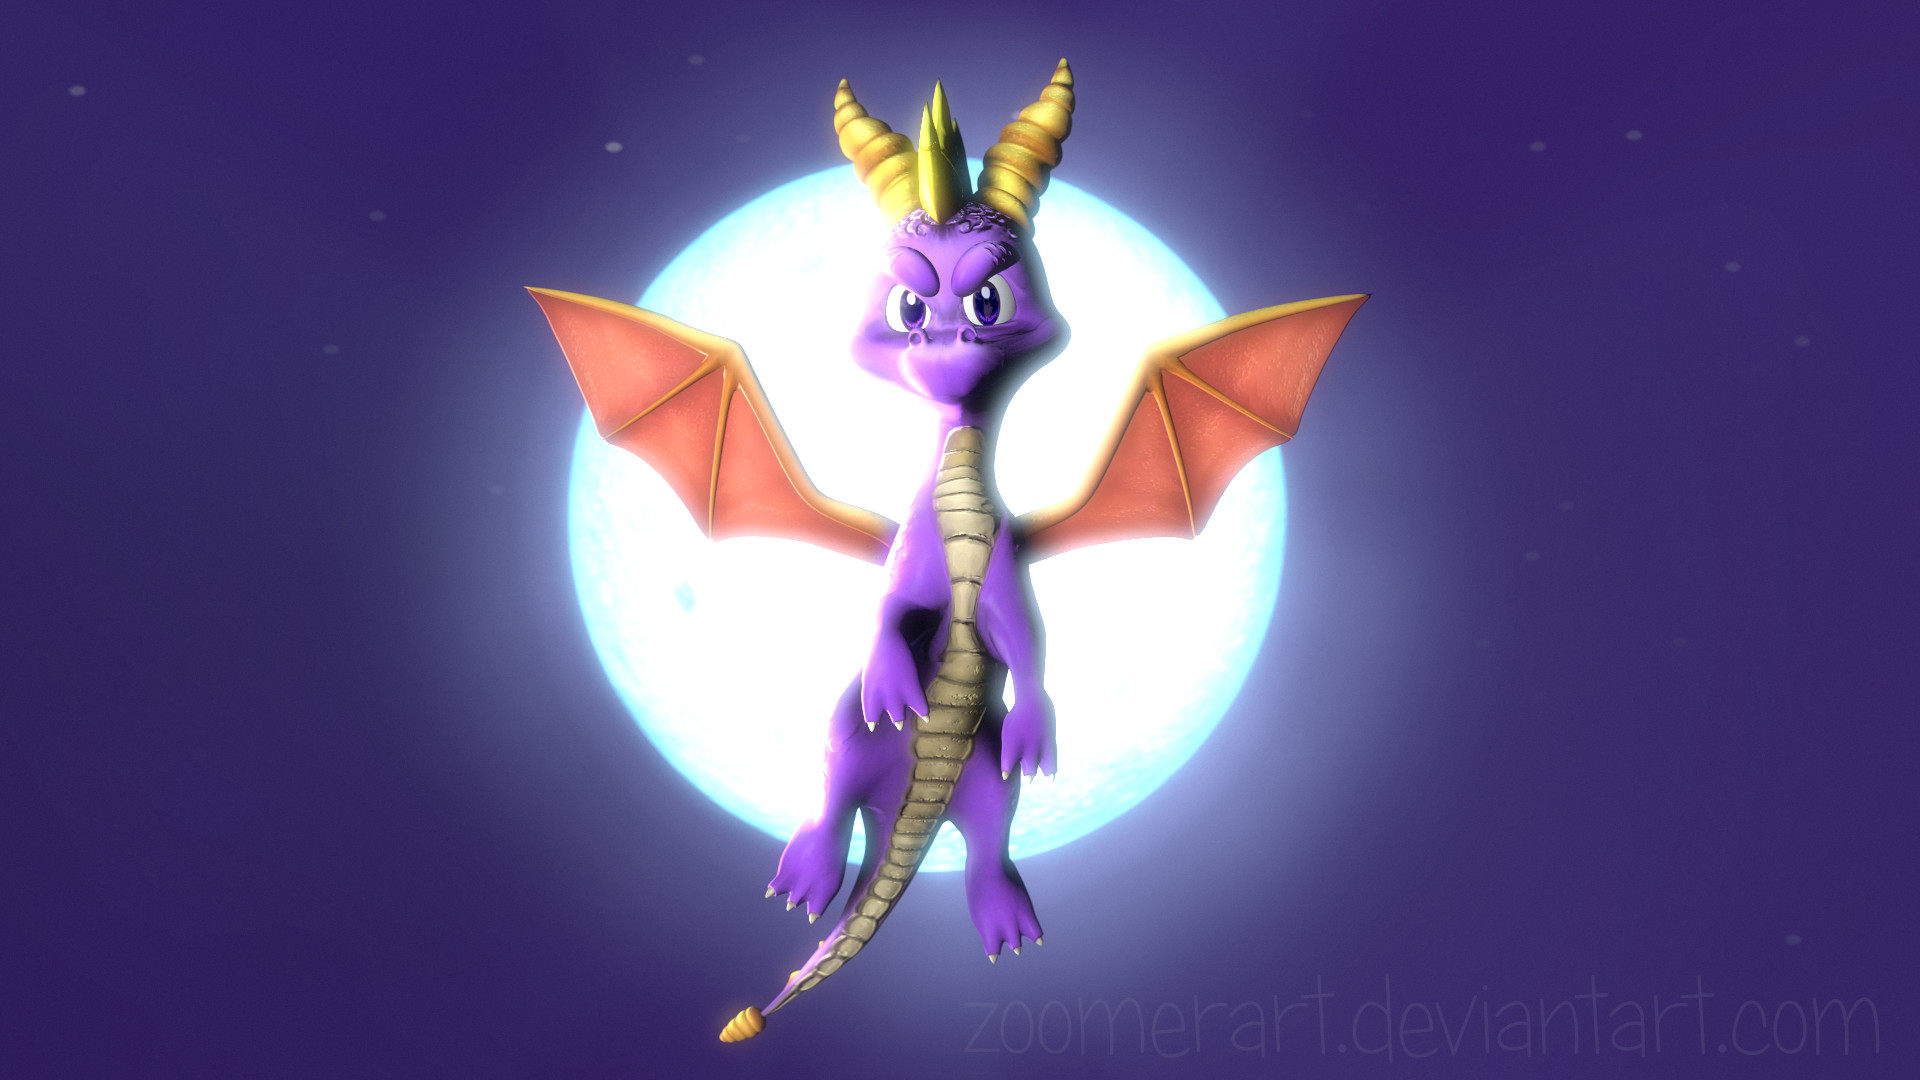 1920x1080 ... Spyro: Year of the Dragon [Cover] by ZOomERart